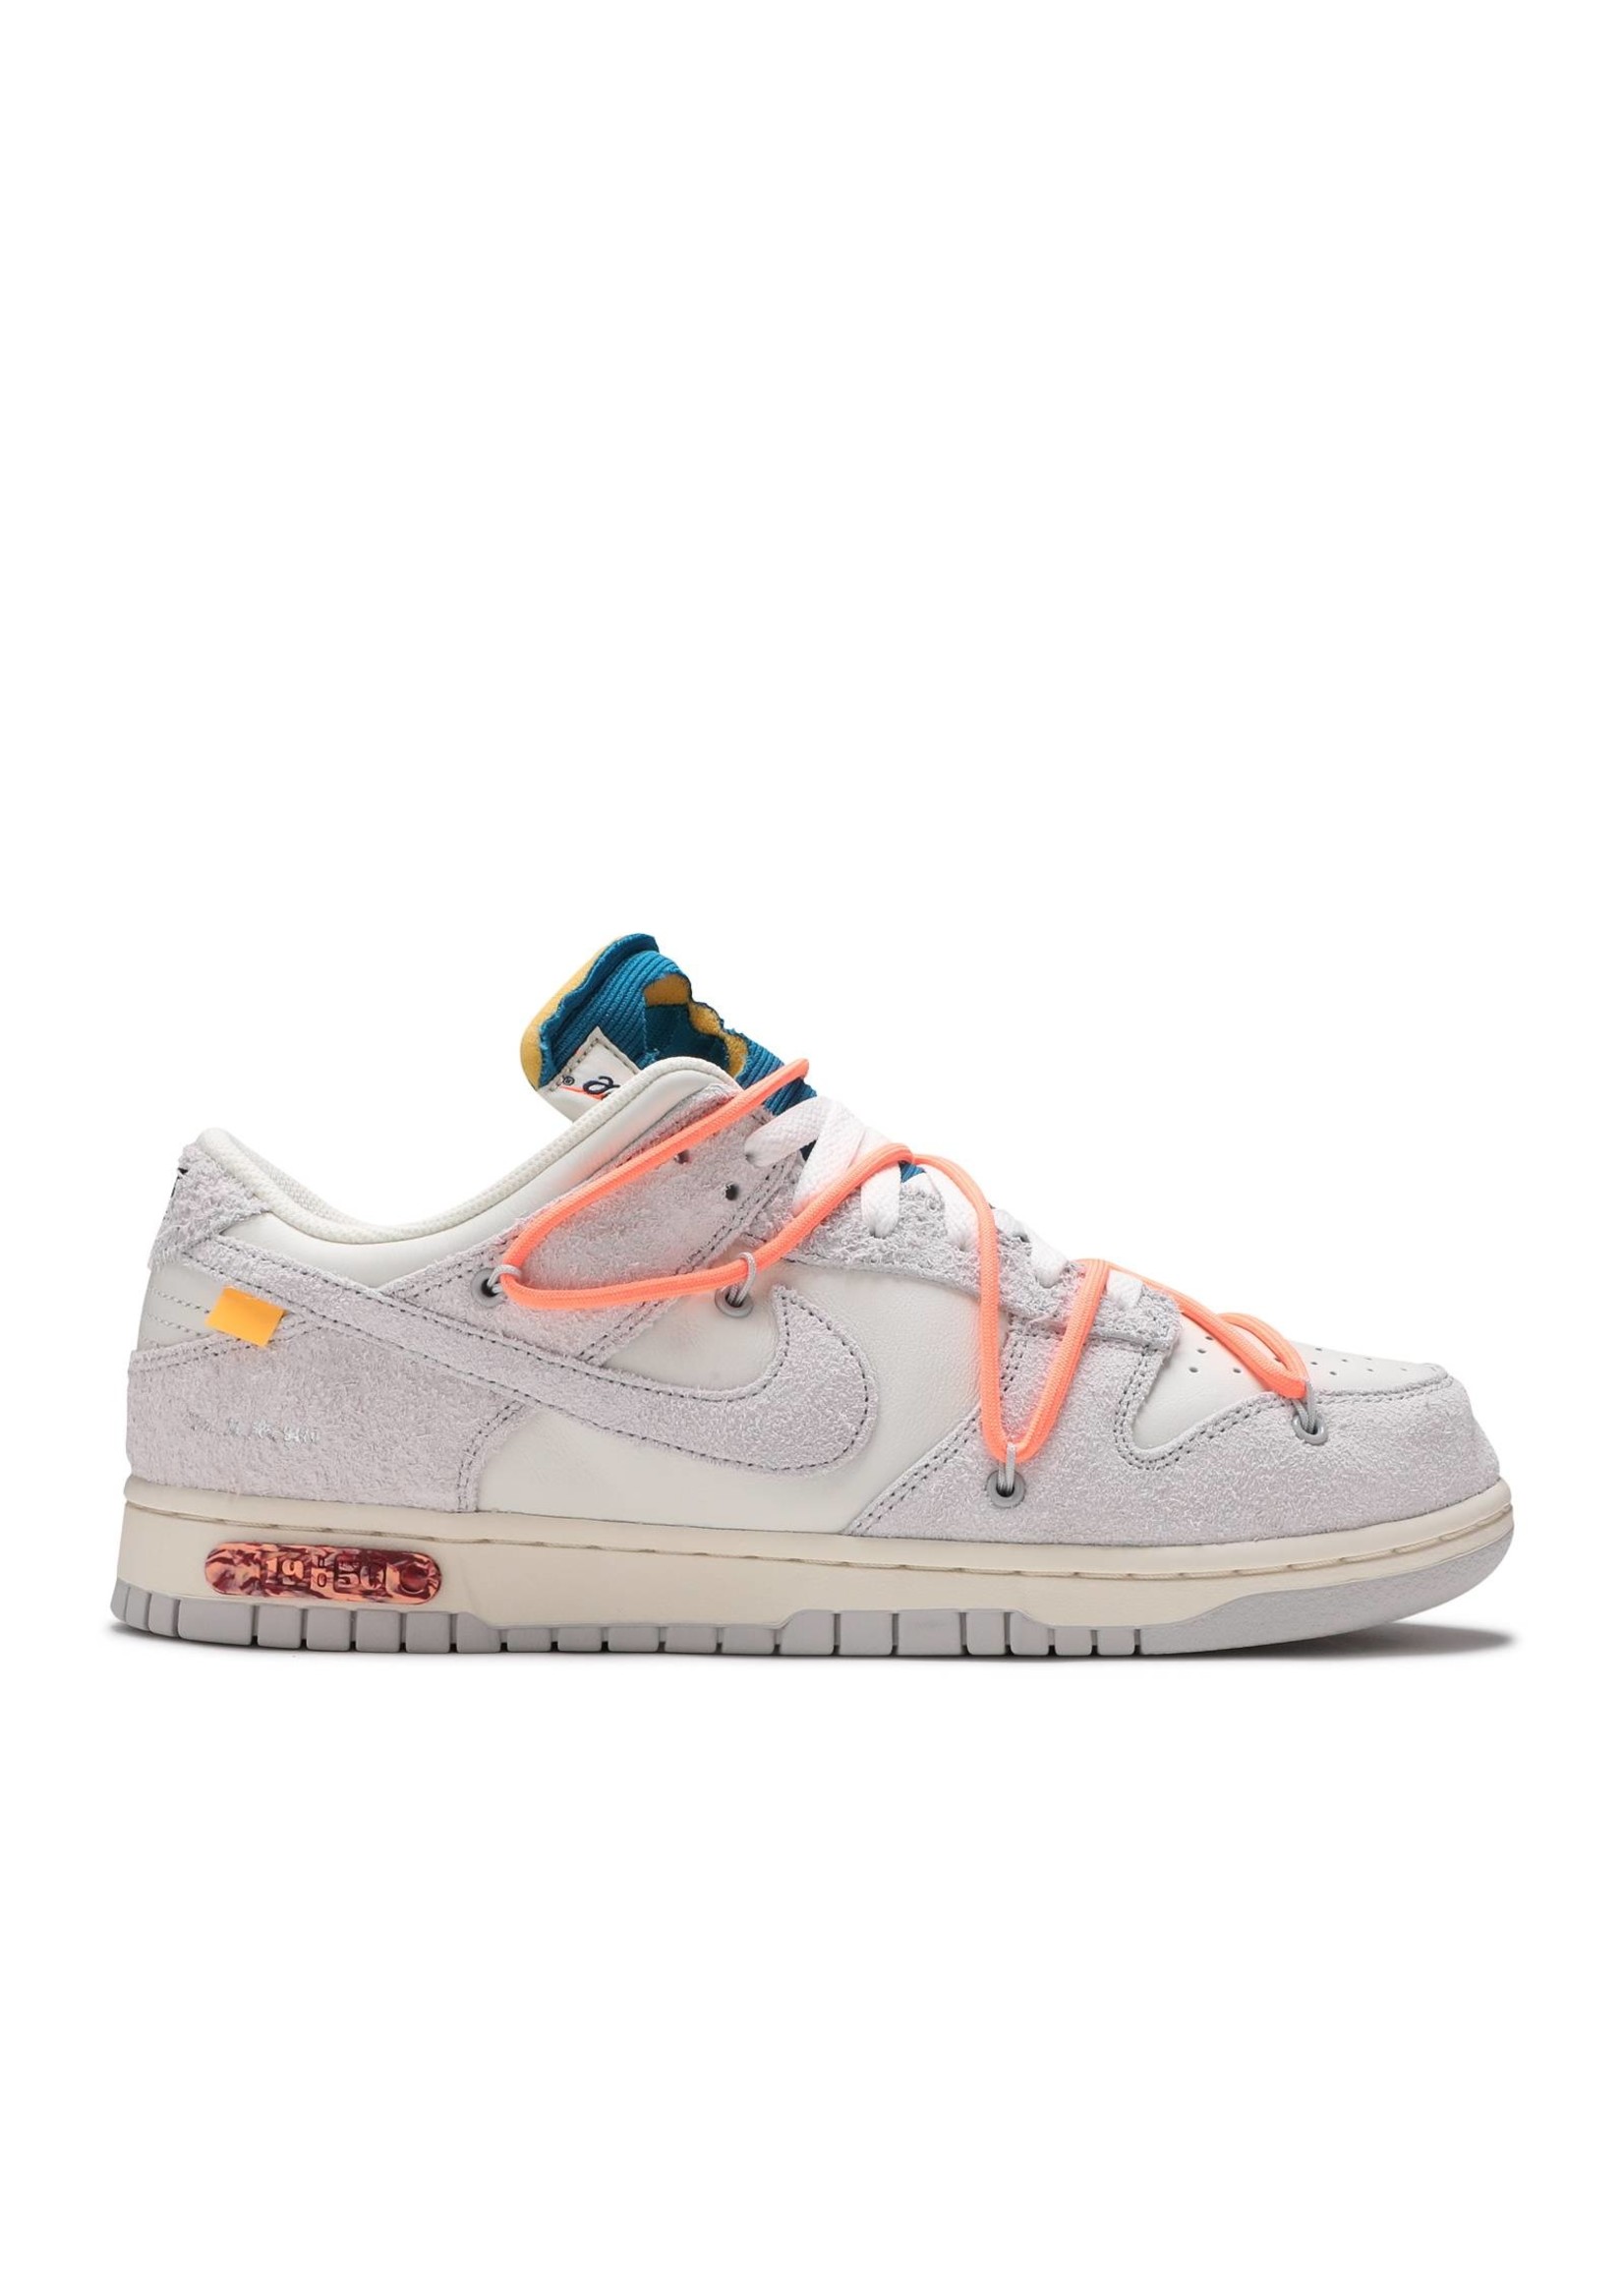 Off white NIKE DUNK X Off White Lot 19 size 9.5